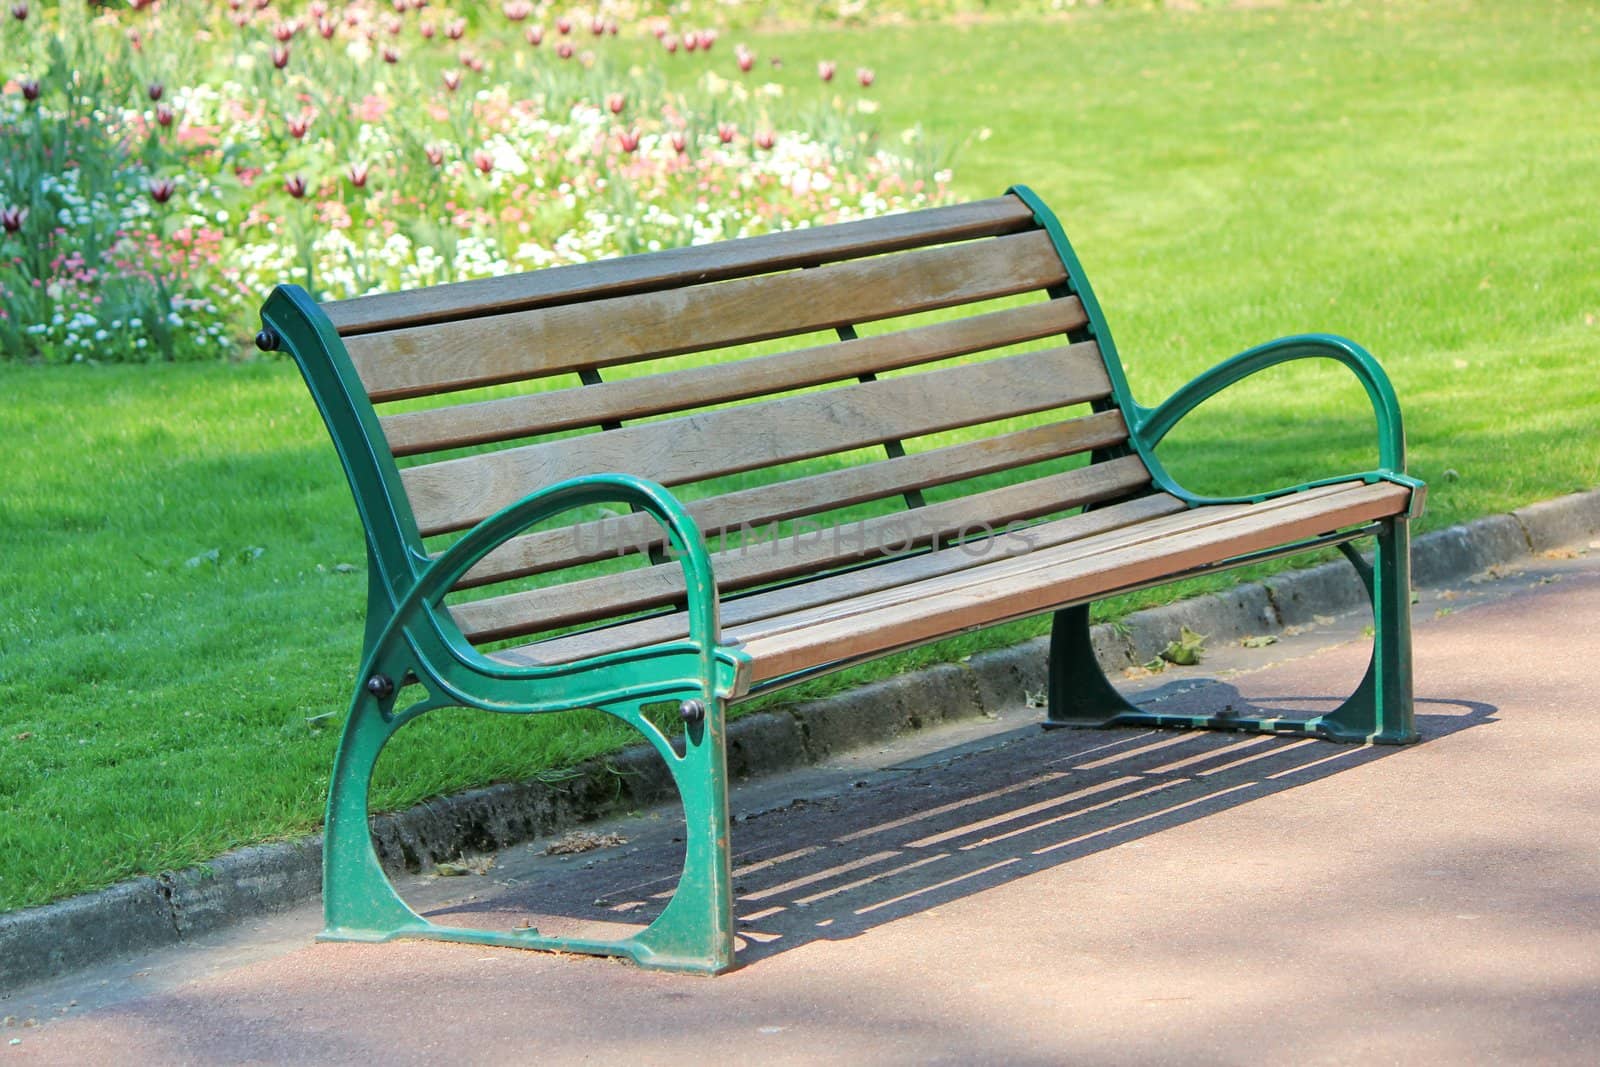 Green and brown wood bench in a park with grass and flowers behind